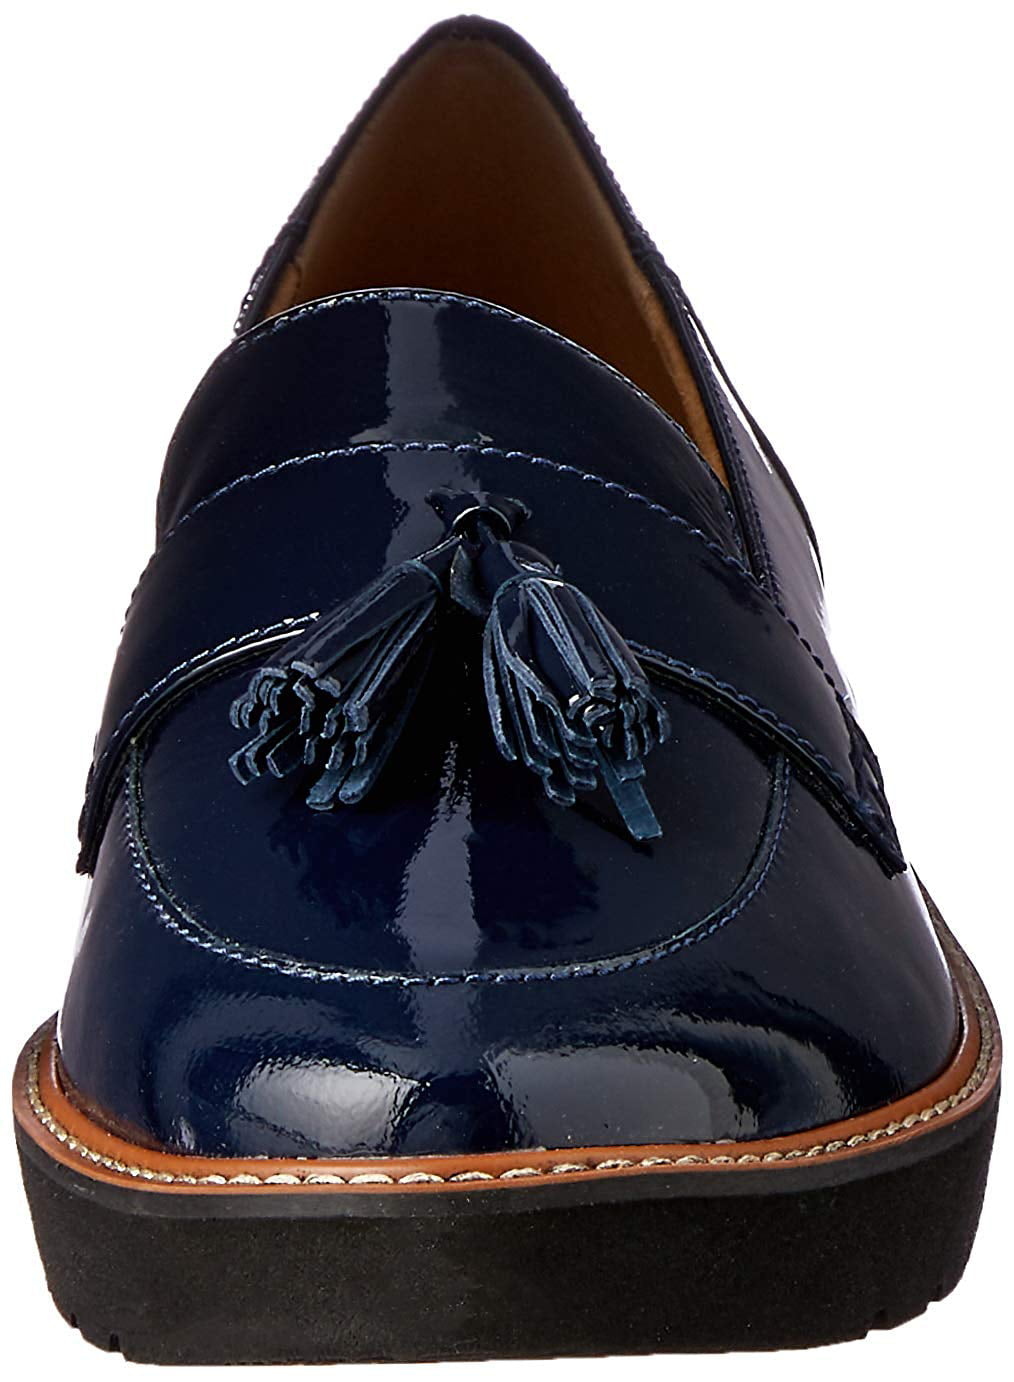 naturalizer august loafer navy